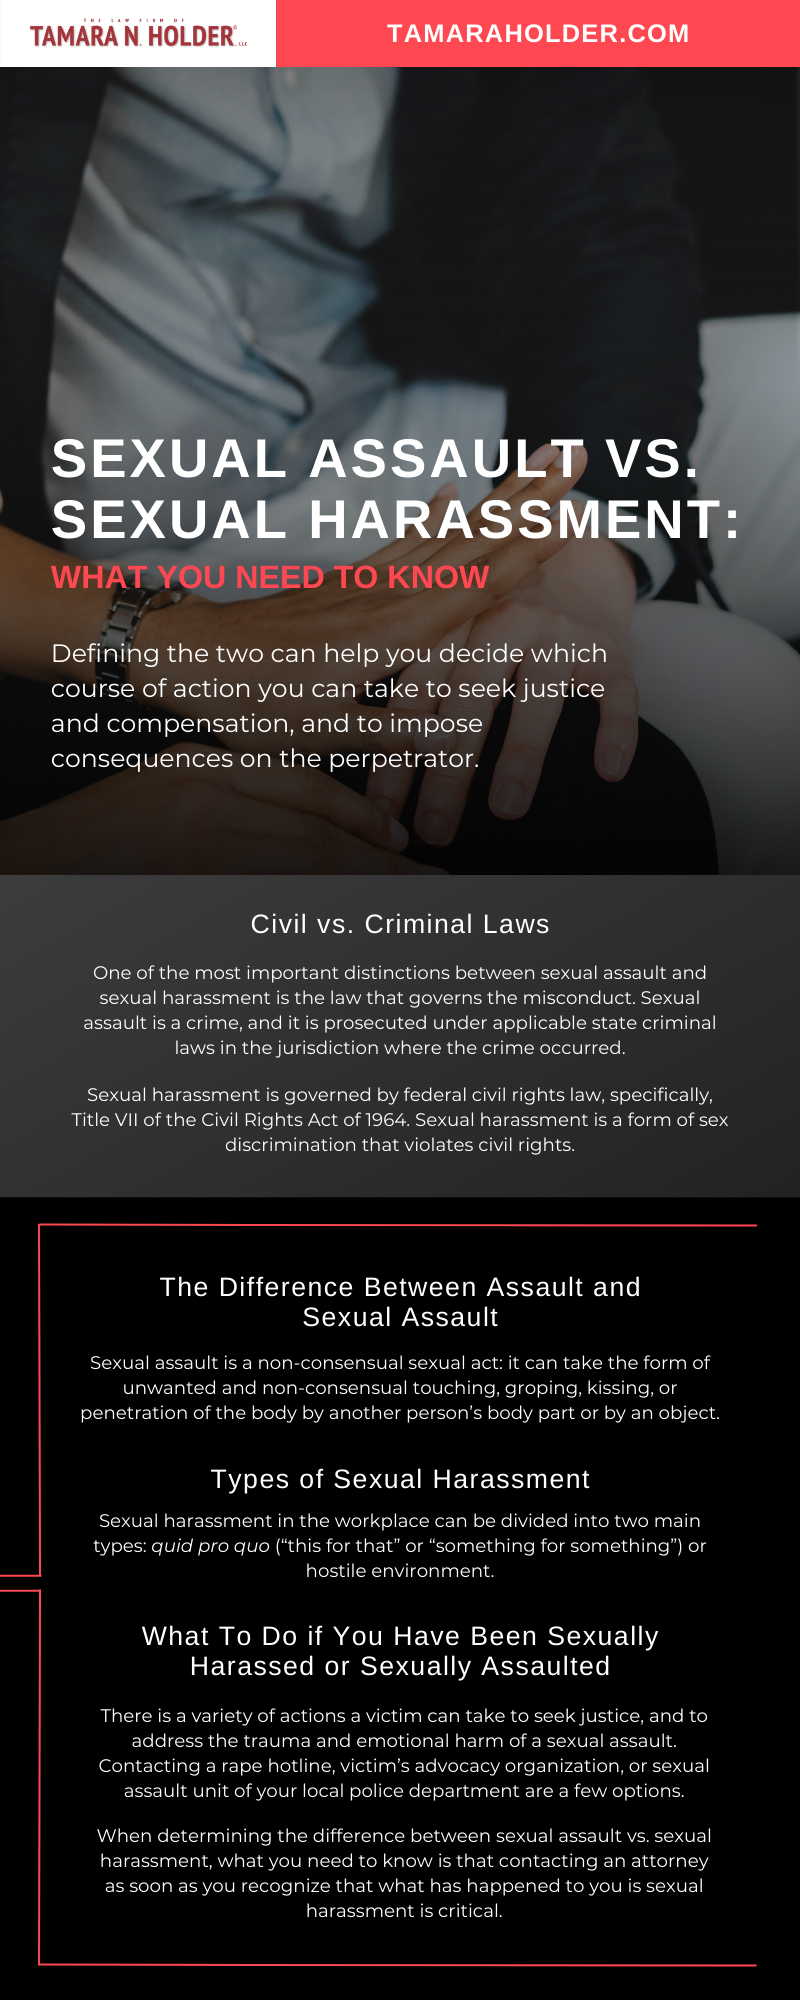 Sexual Assault vs. Sexual Harassment: What You Need To Know